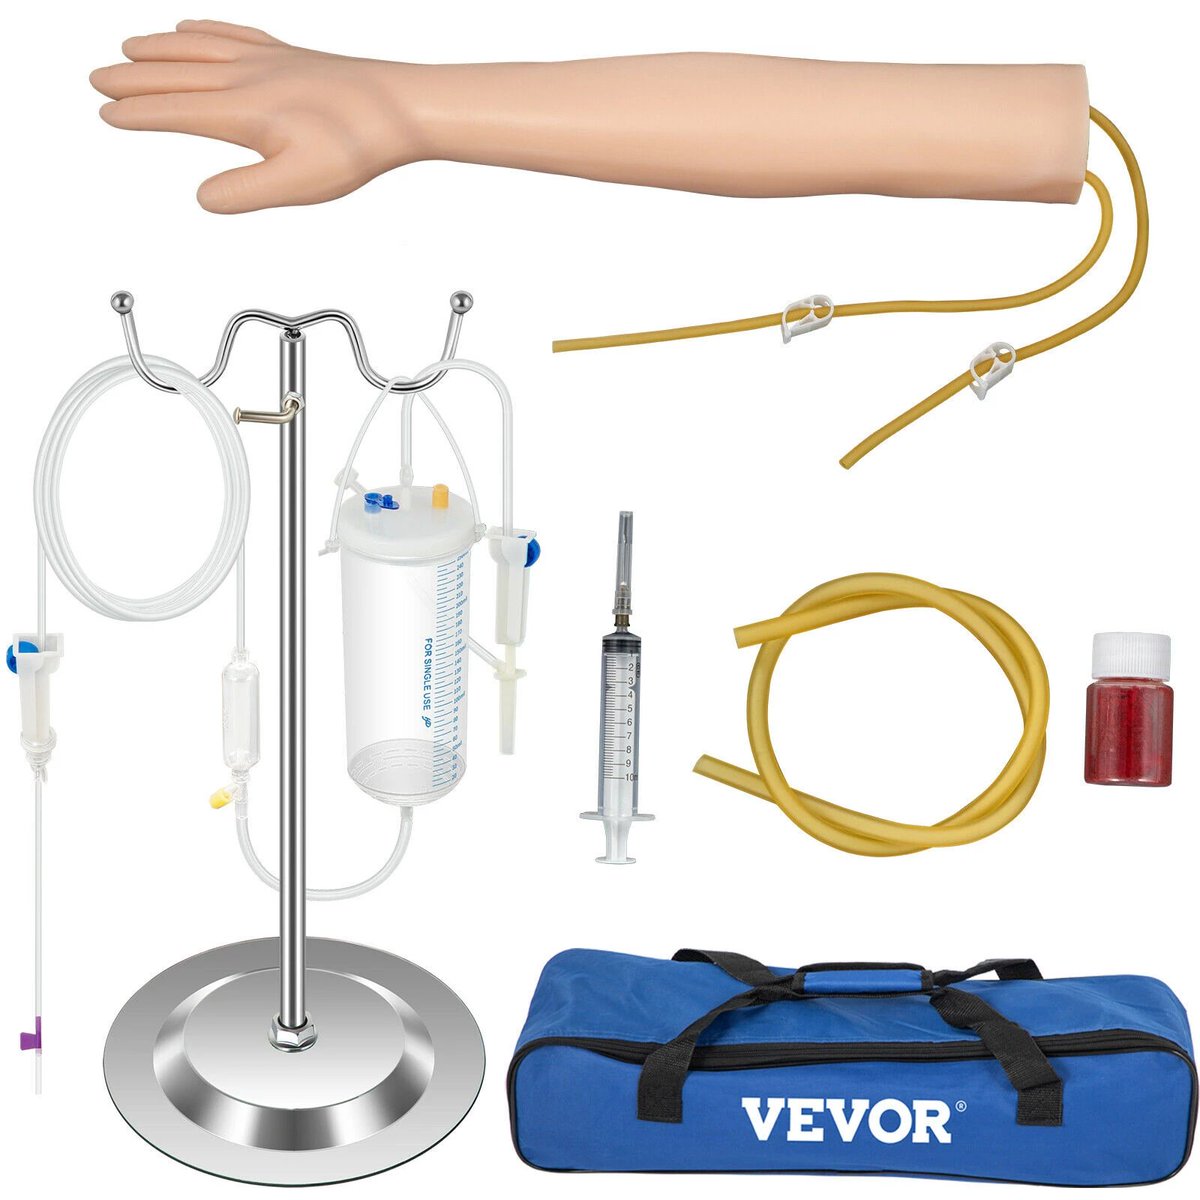 I saw the top part and was like OH GOD NOT MORE SEX TOYS but hey, it's weirder:it's an Intravenous Practice Arm!